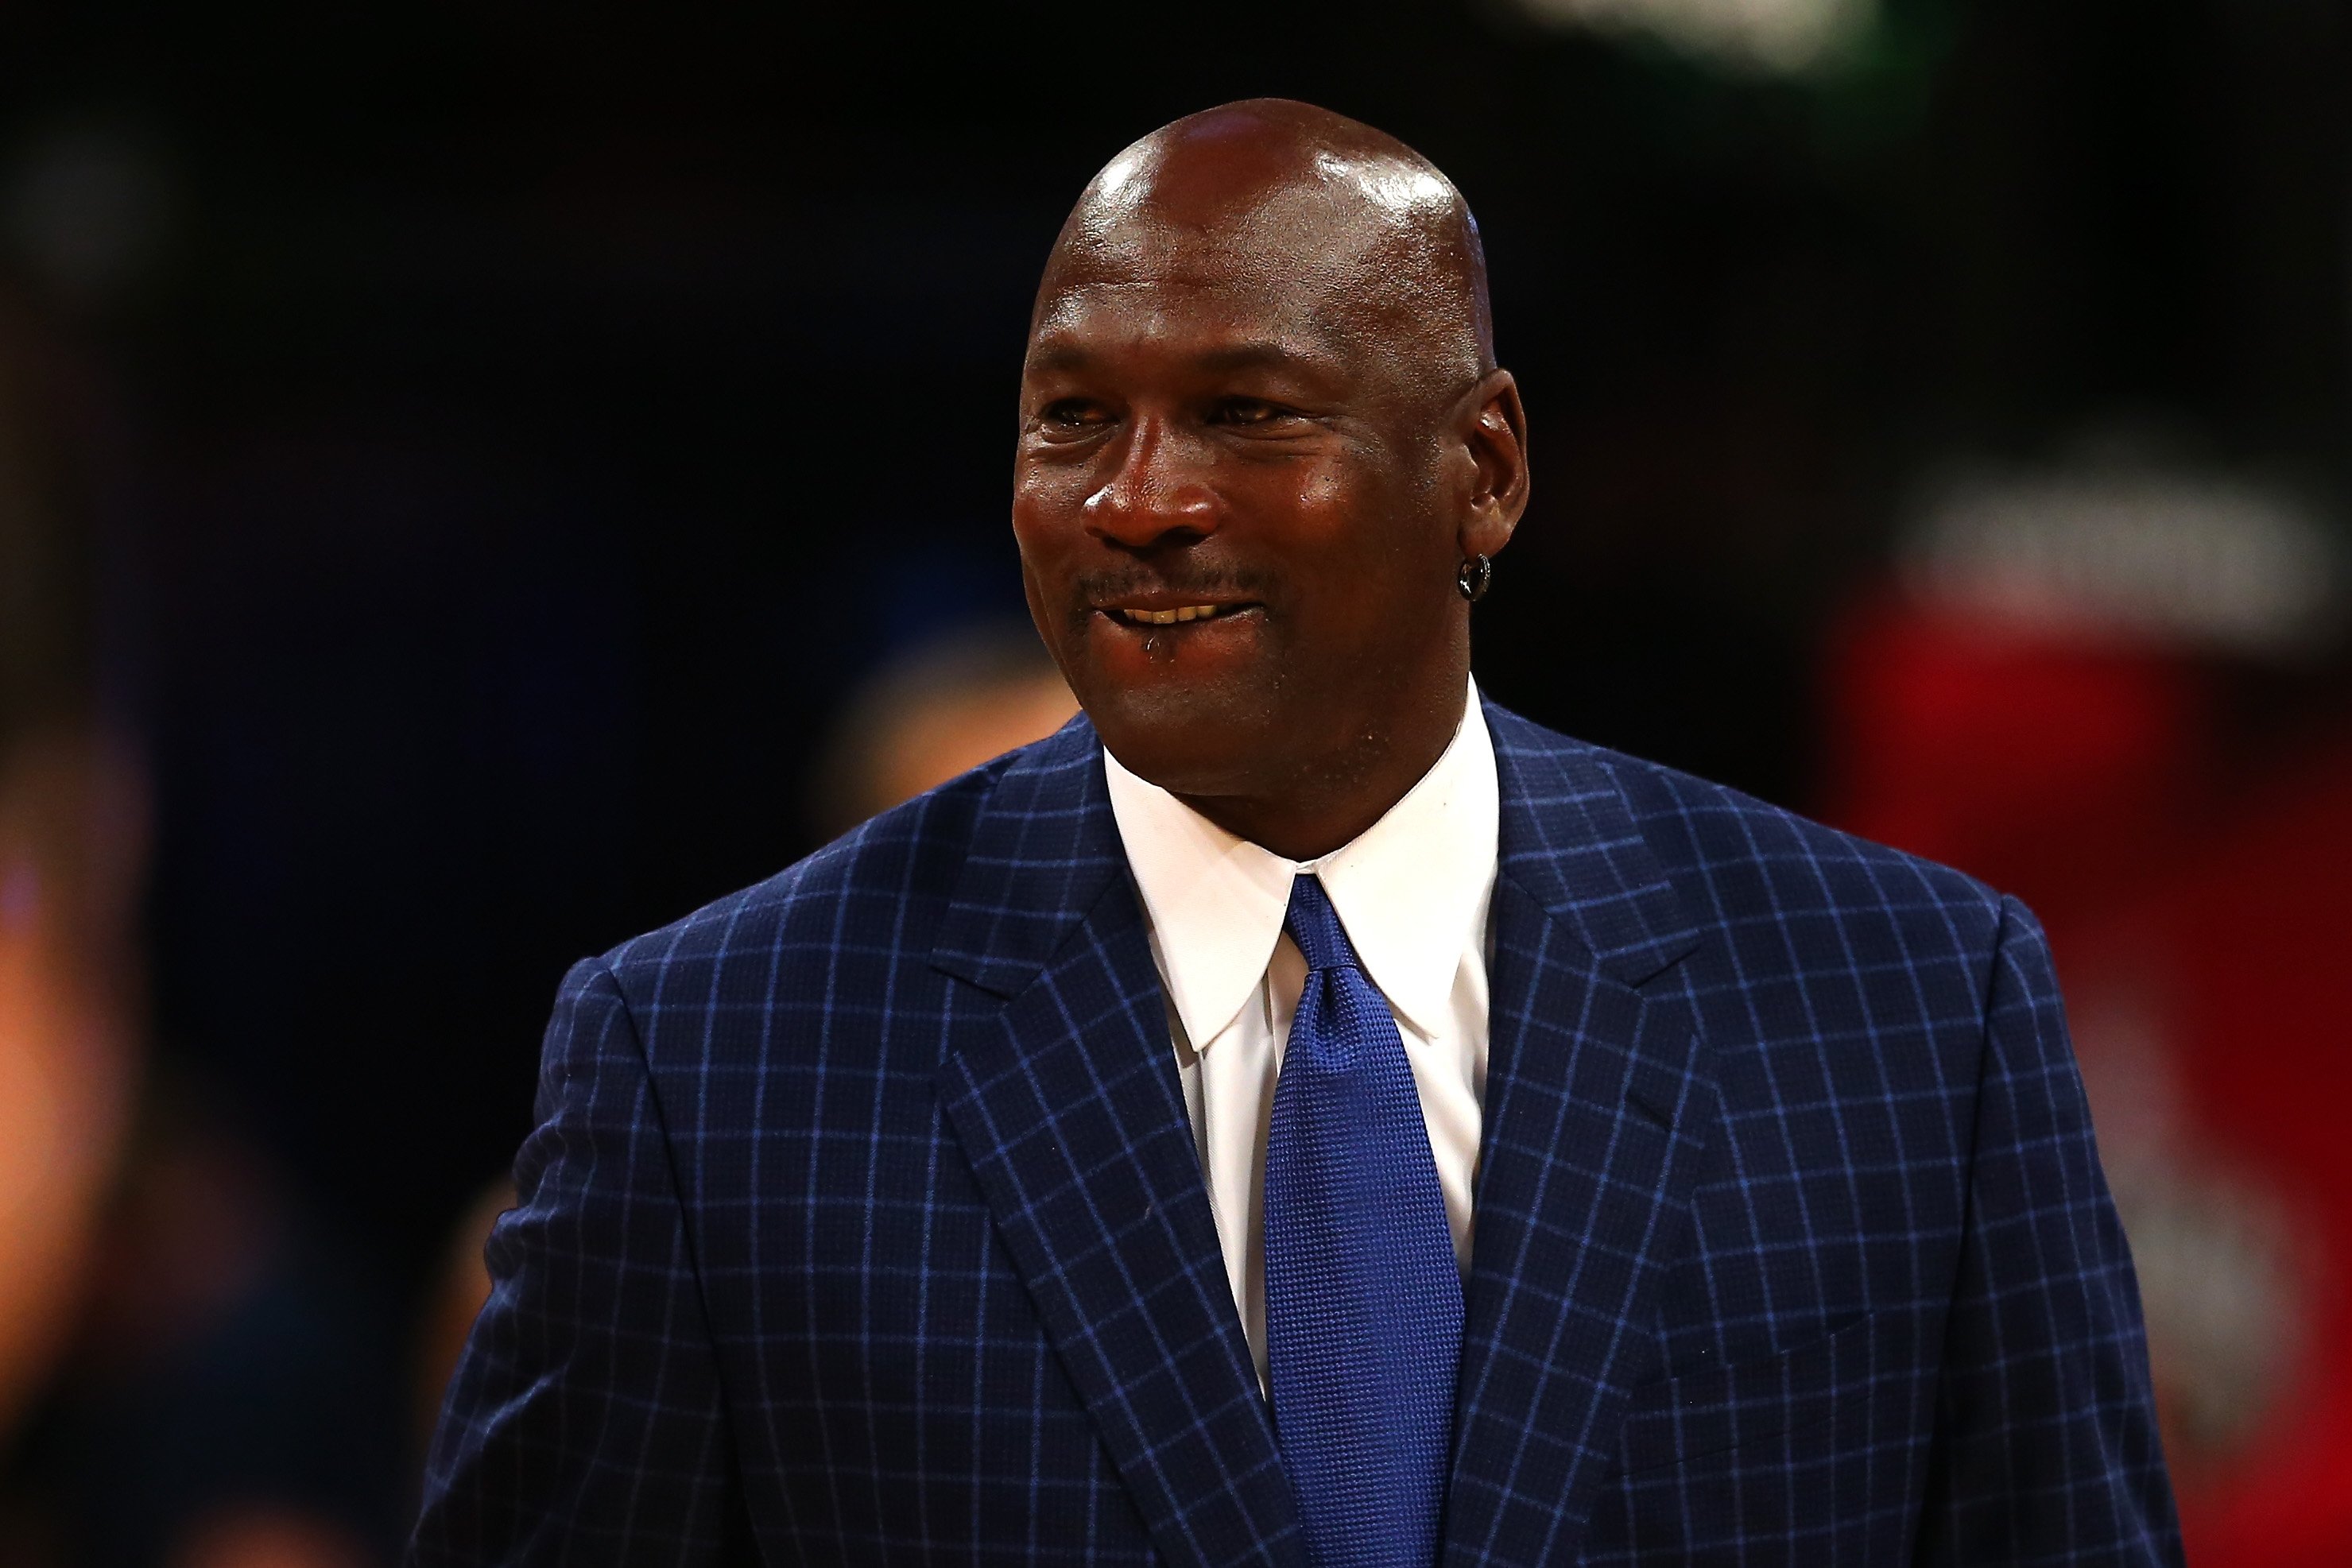 Michael Jordan during the NBA All-Star Game 2016 at the Air Canada Centre on February 14, 2016 | Photo: GettyImages